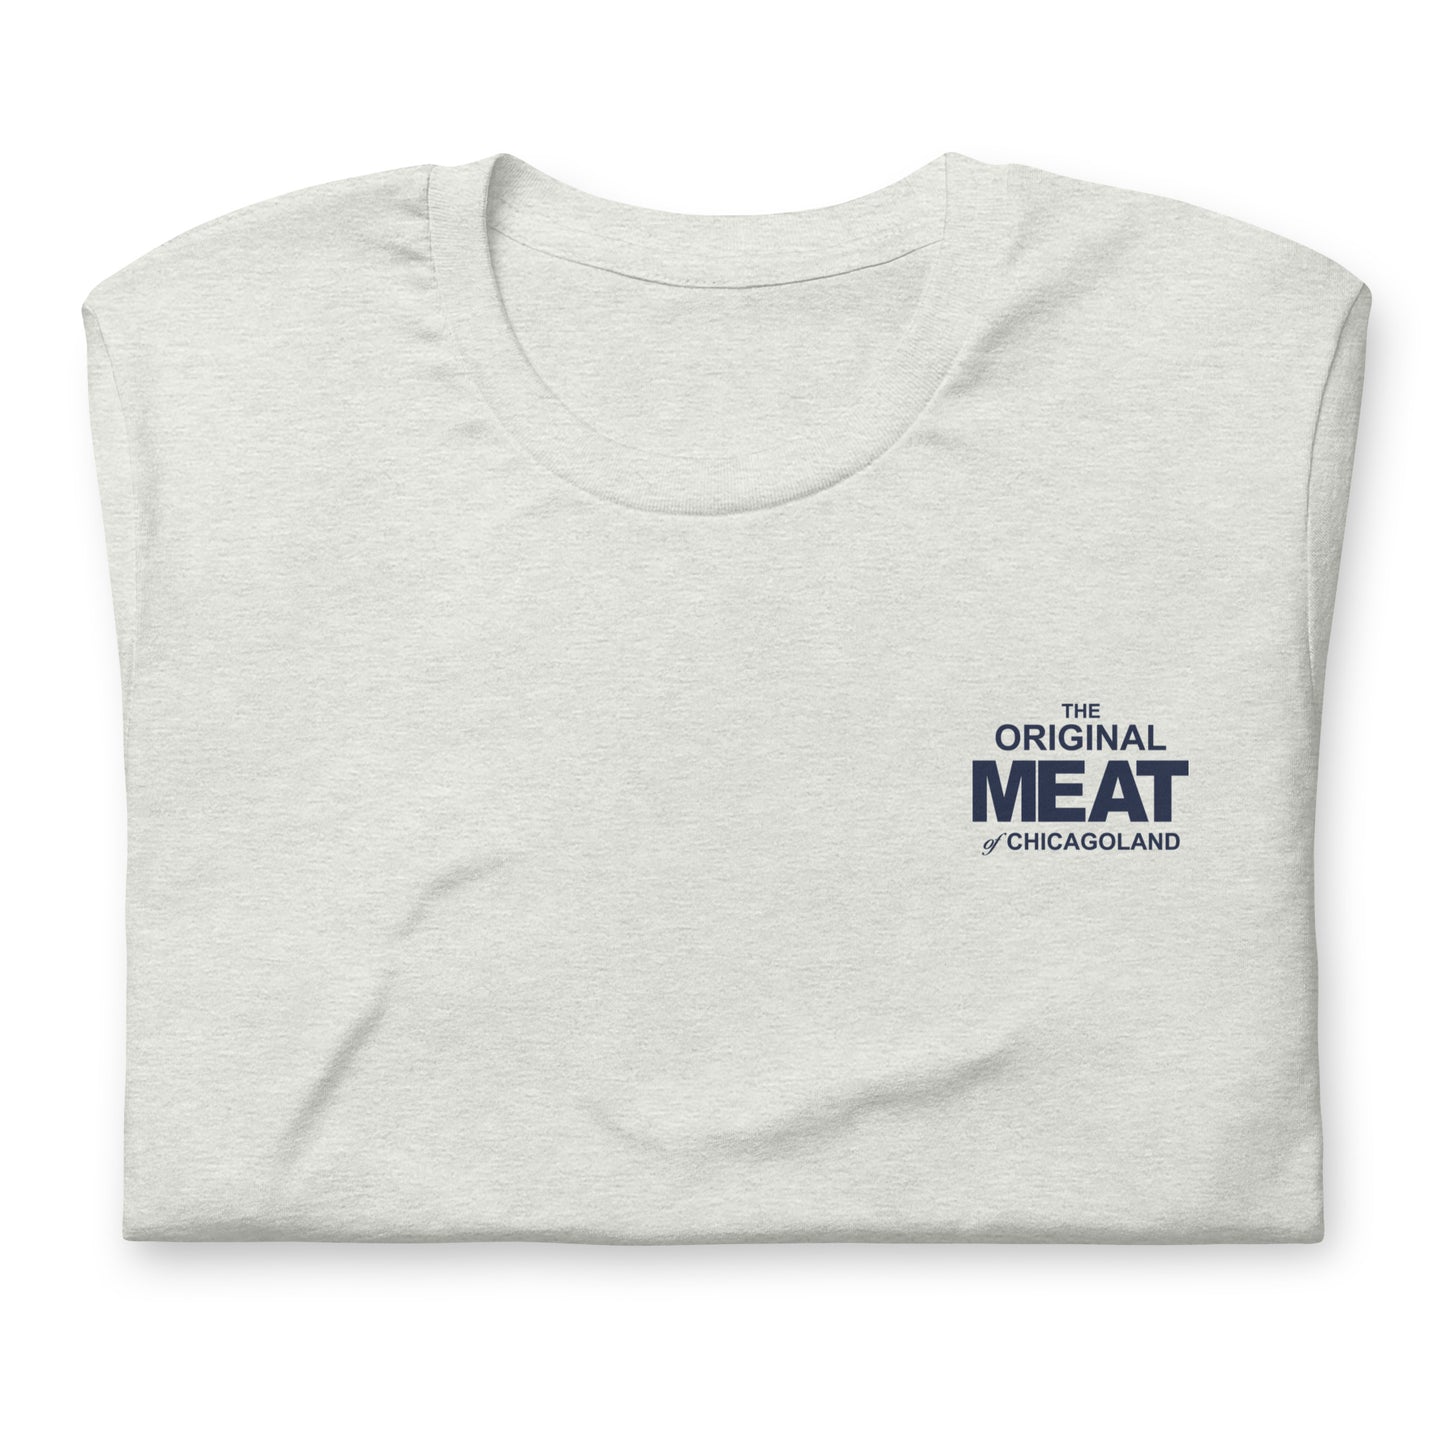 The Original MEAT of Chicagoland Unisex t-shirt